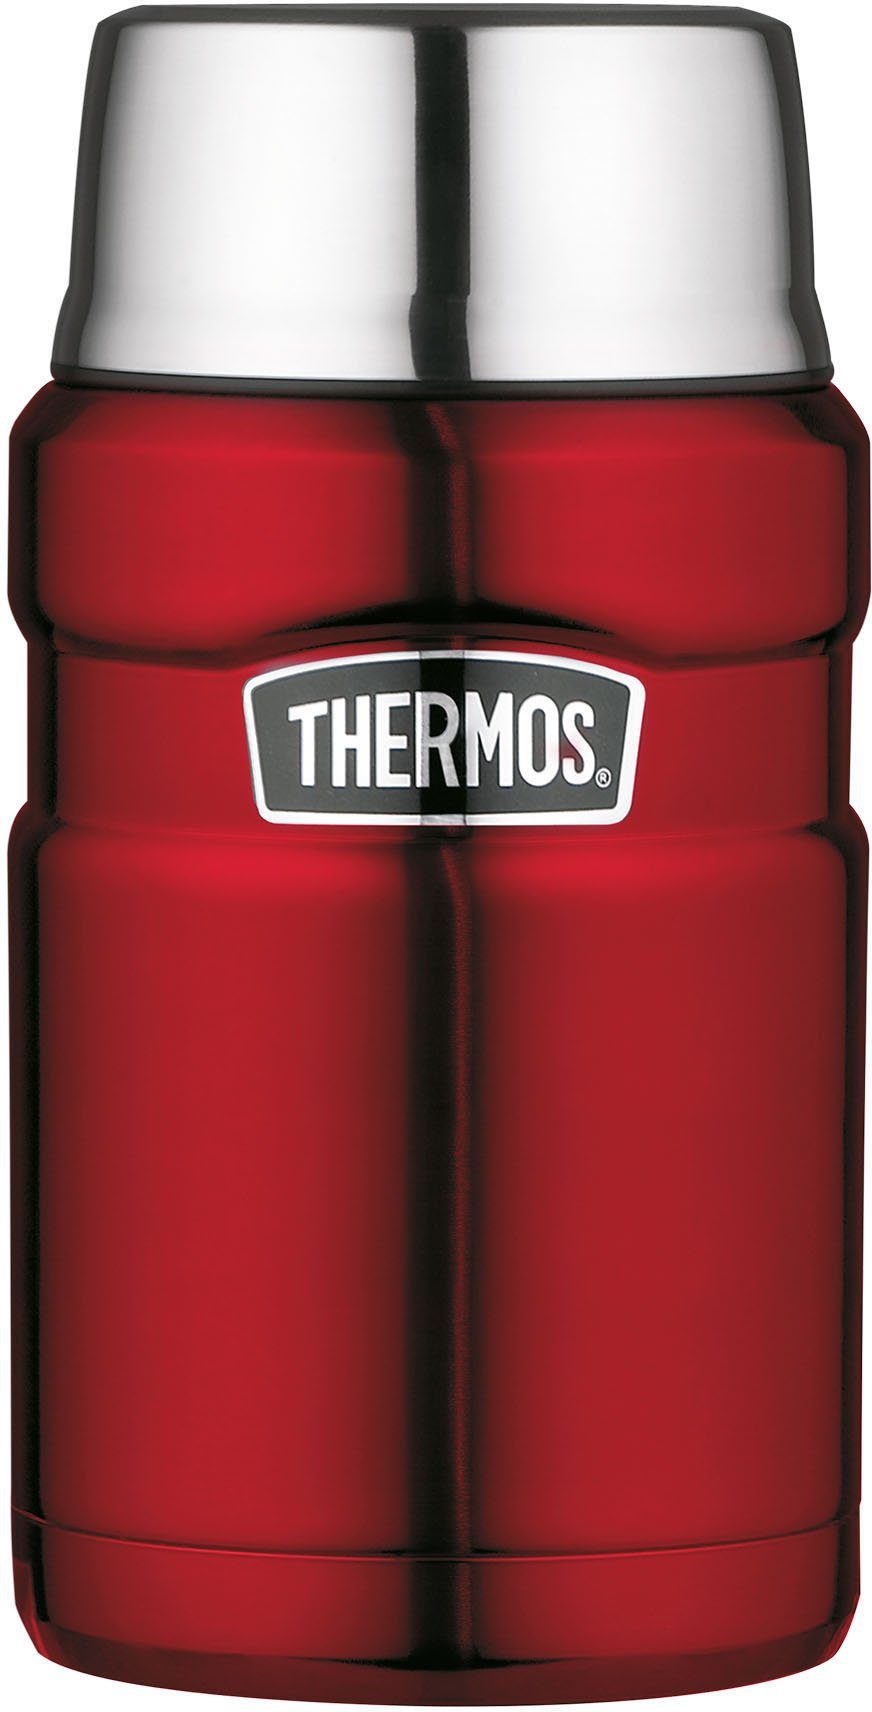 THERMOS Thermobehälter Stainless King, Edelstahl, (1-tlg), 710 ml rot